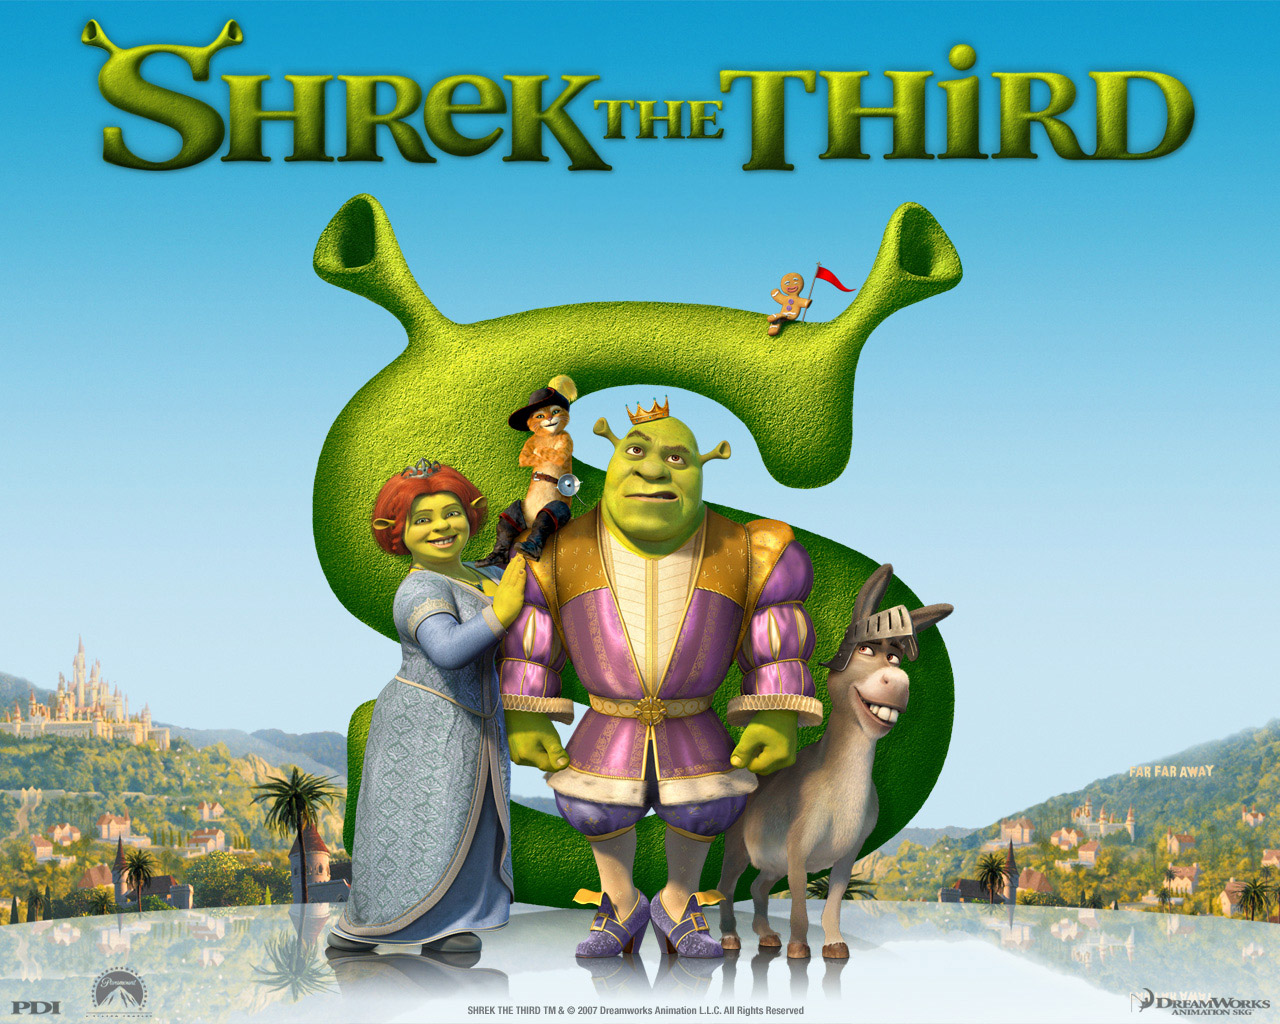 Shrek The Third 3rd Movie Wallpaper Free HD Backgrounds Images Pictures